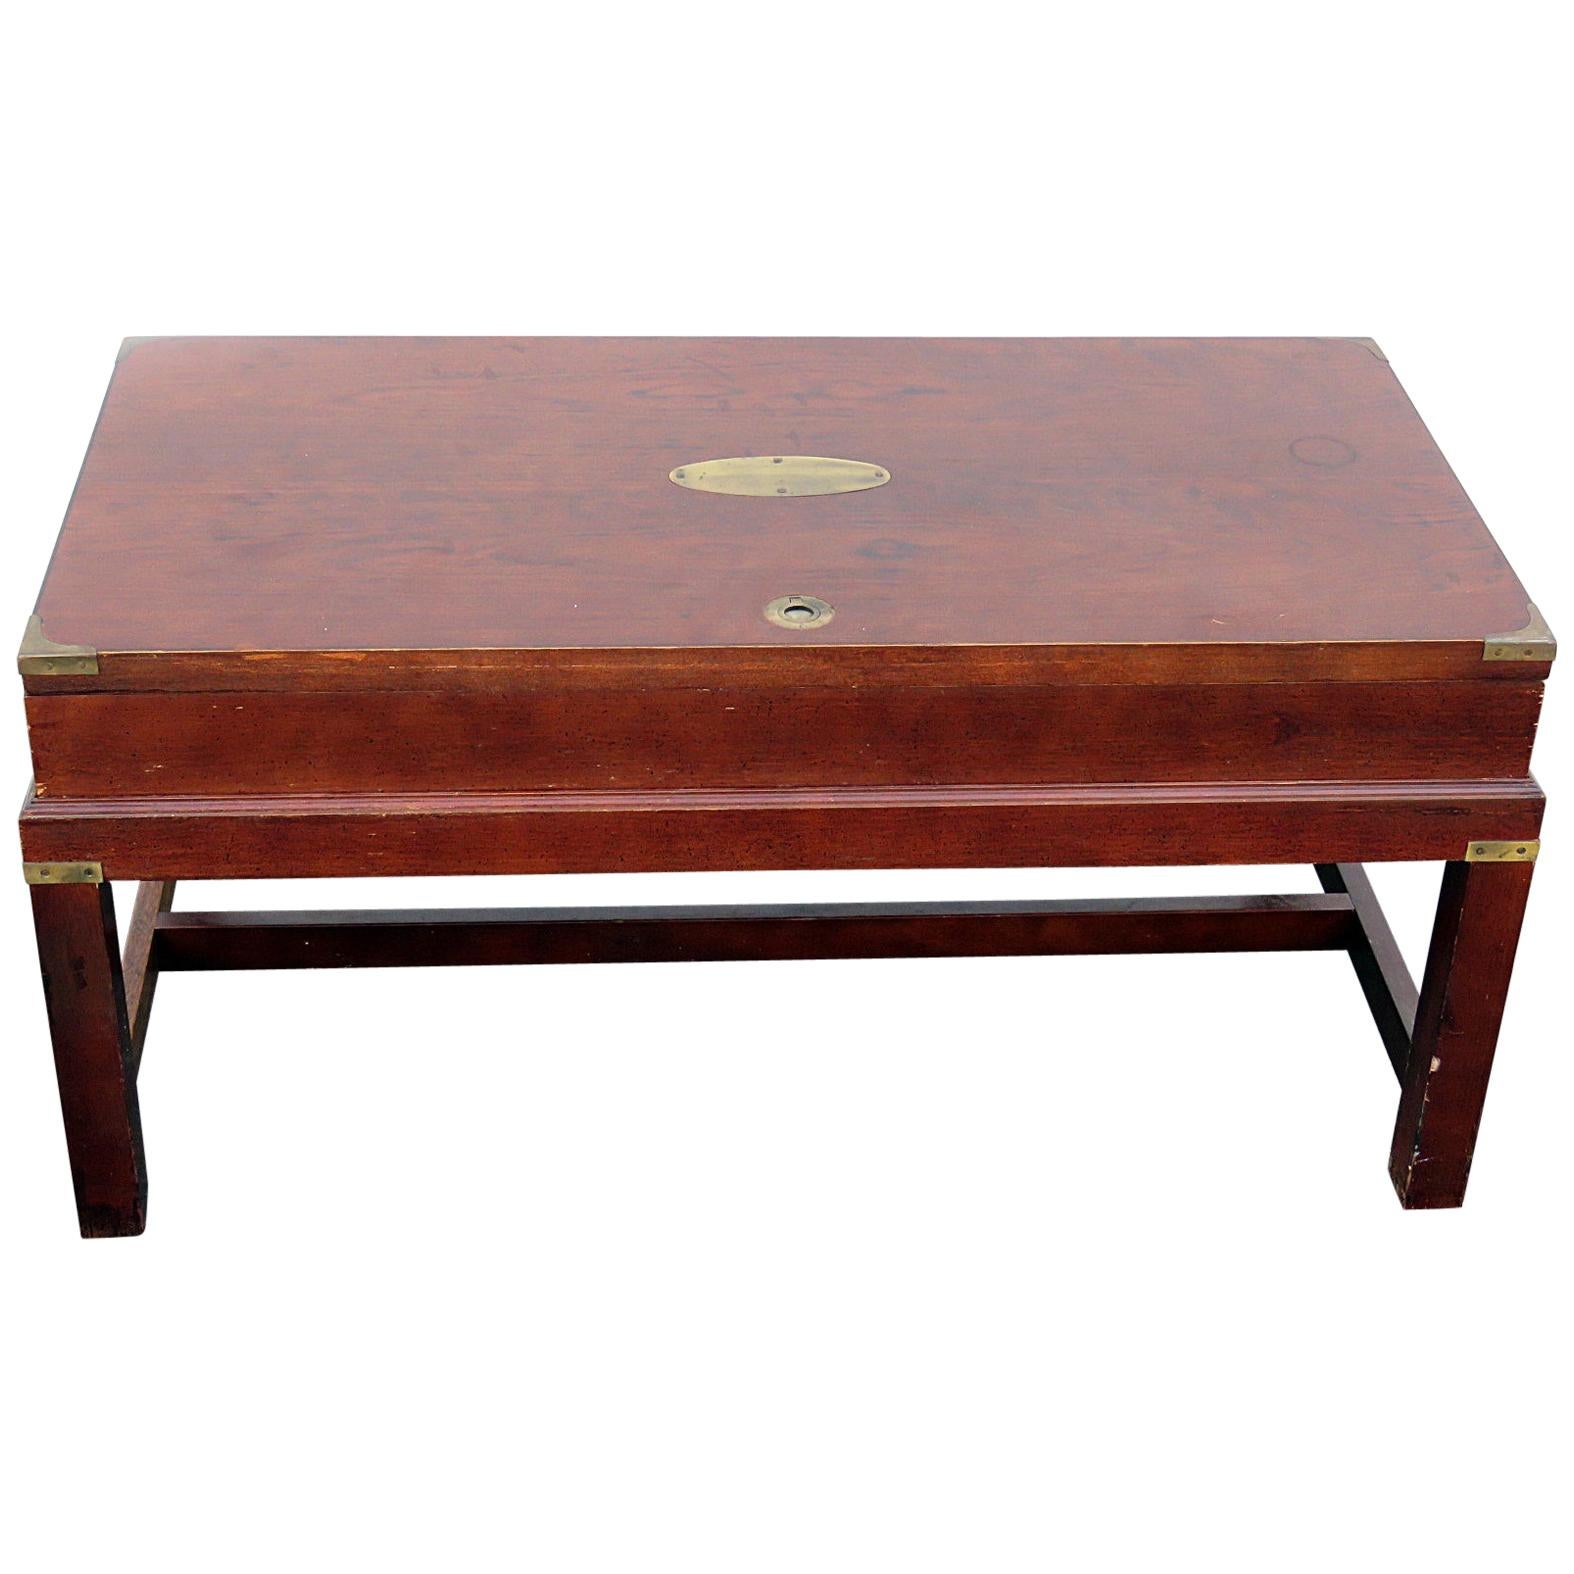 Campaign Style Box on Stand or Coffee Table